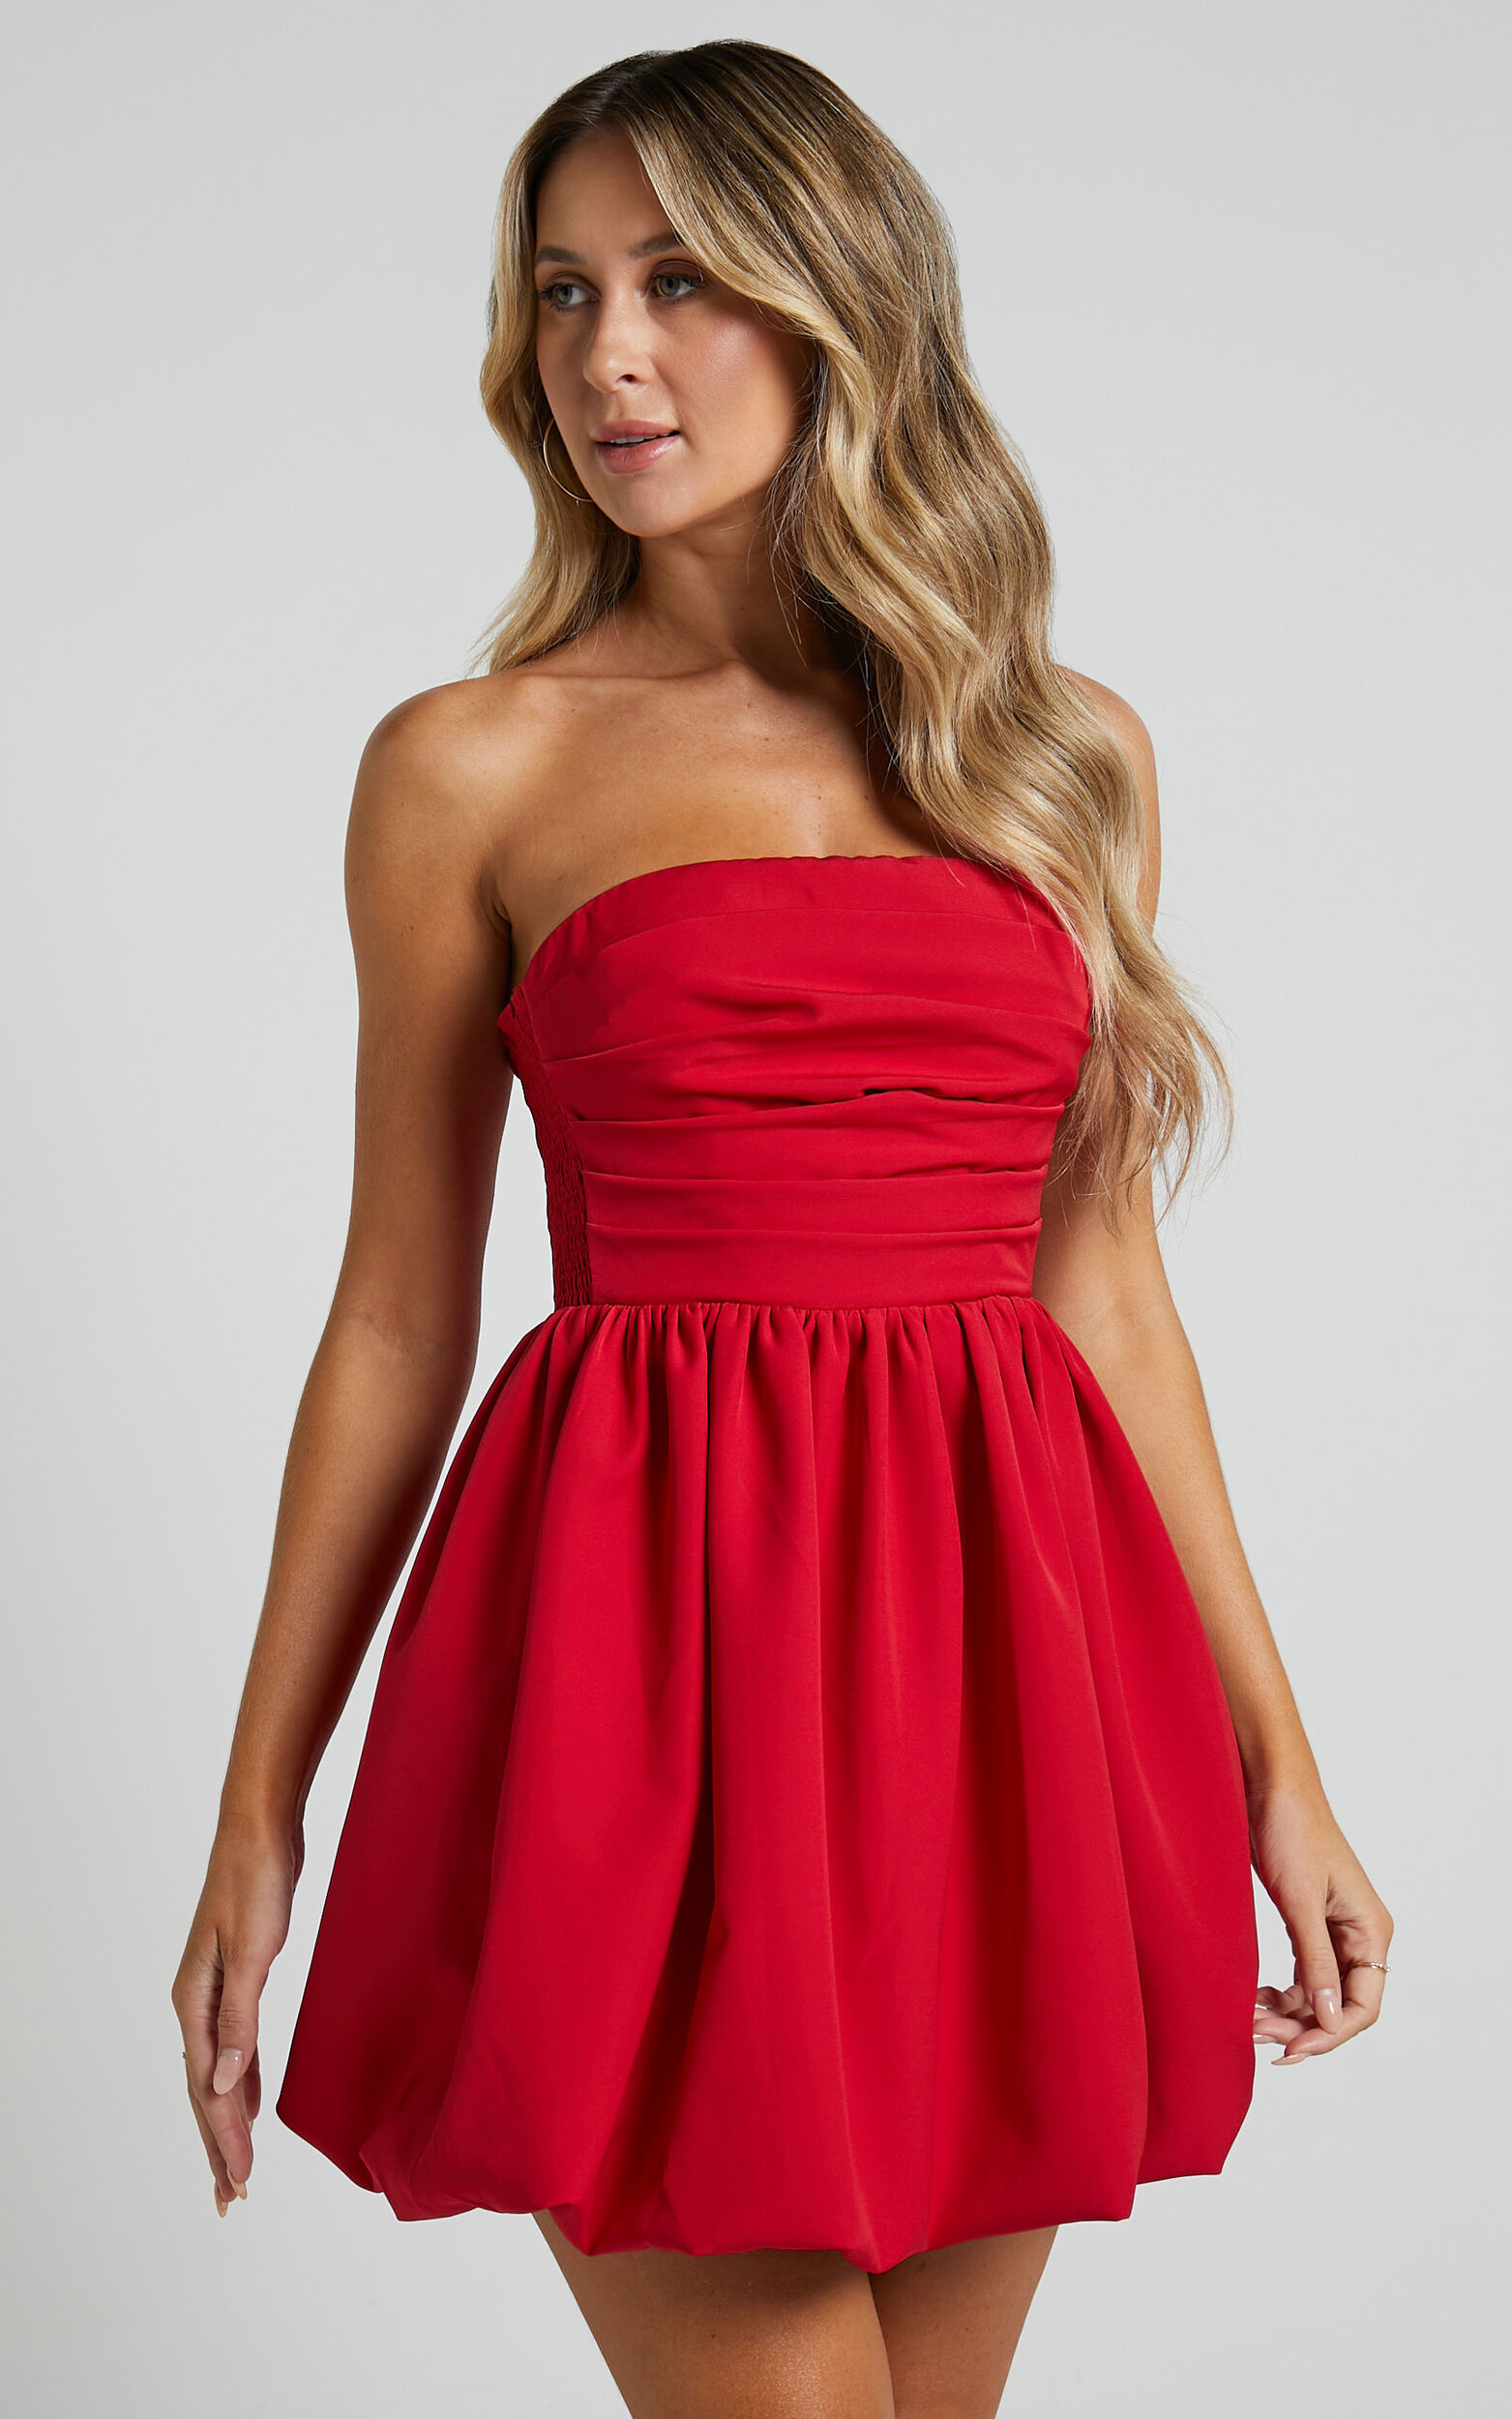 Score a Women's Strapless Dress and Be a Style Star!